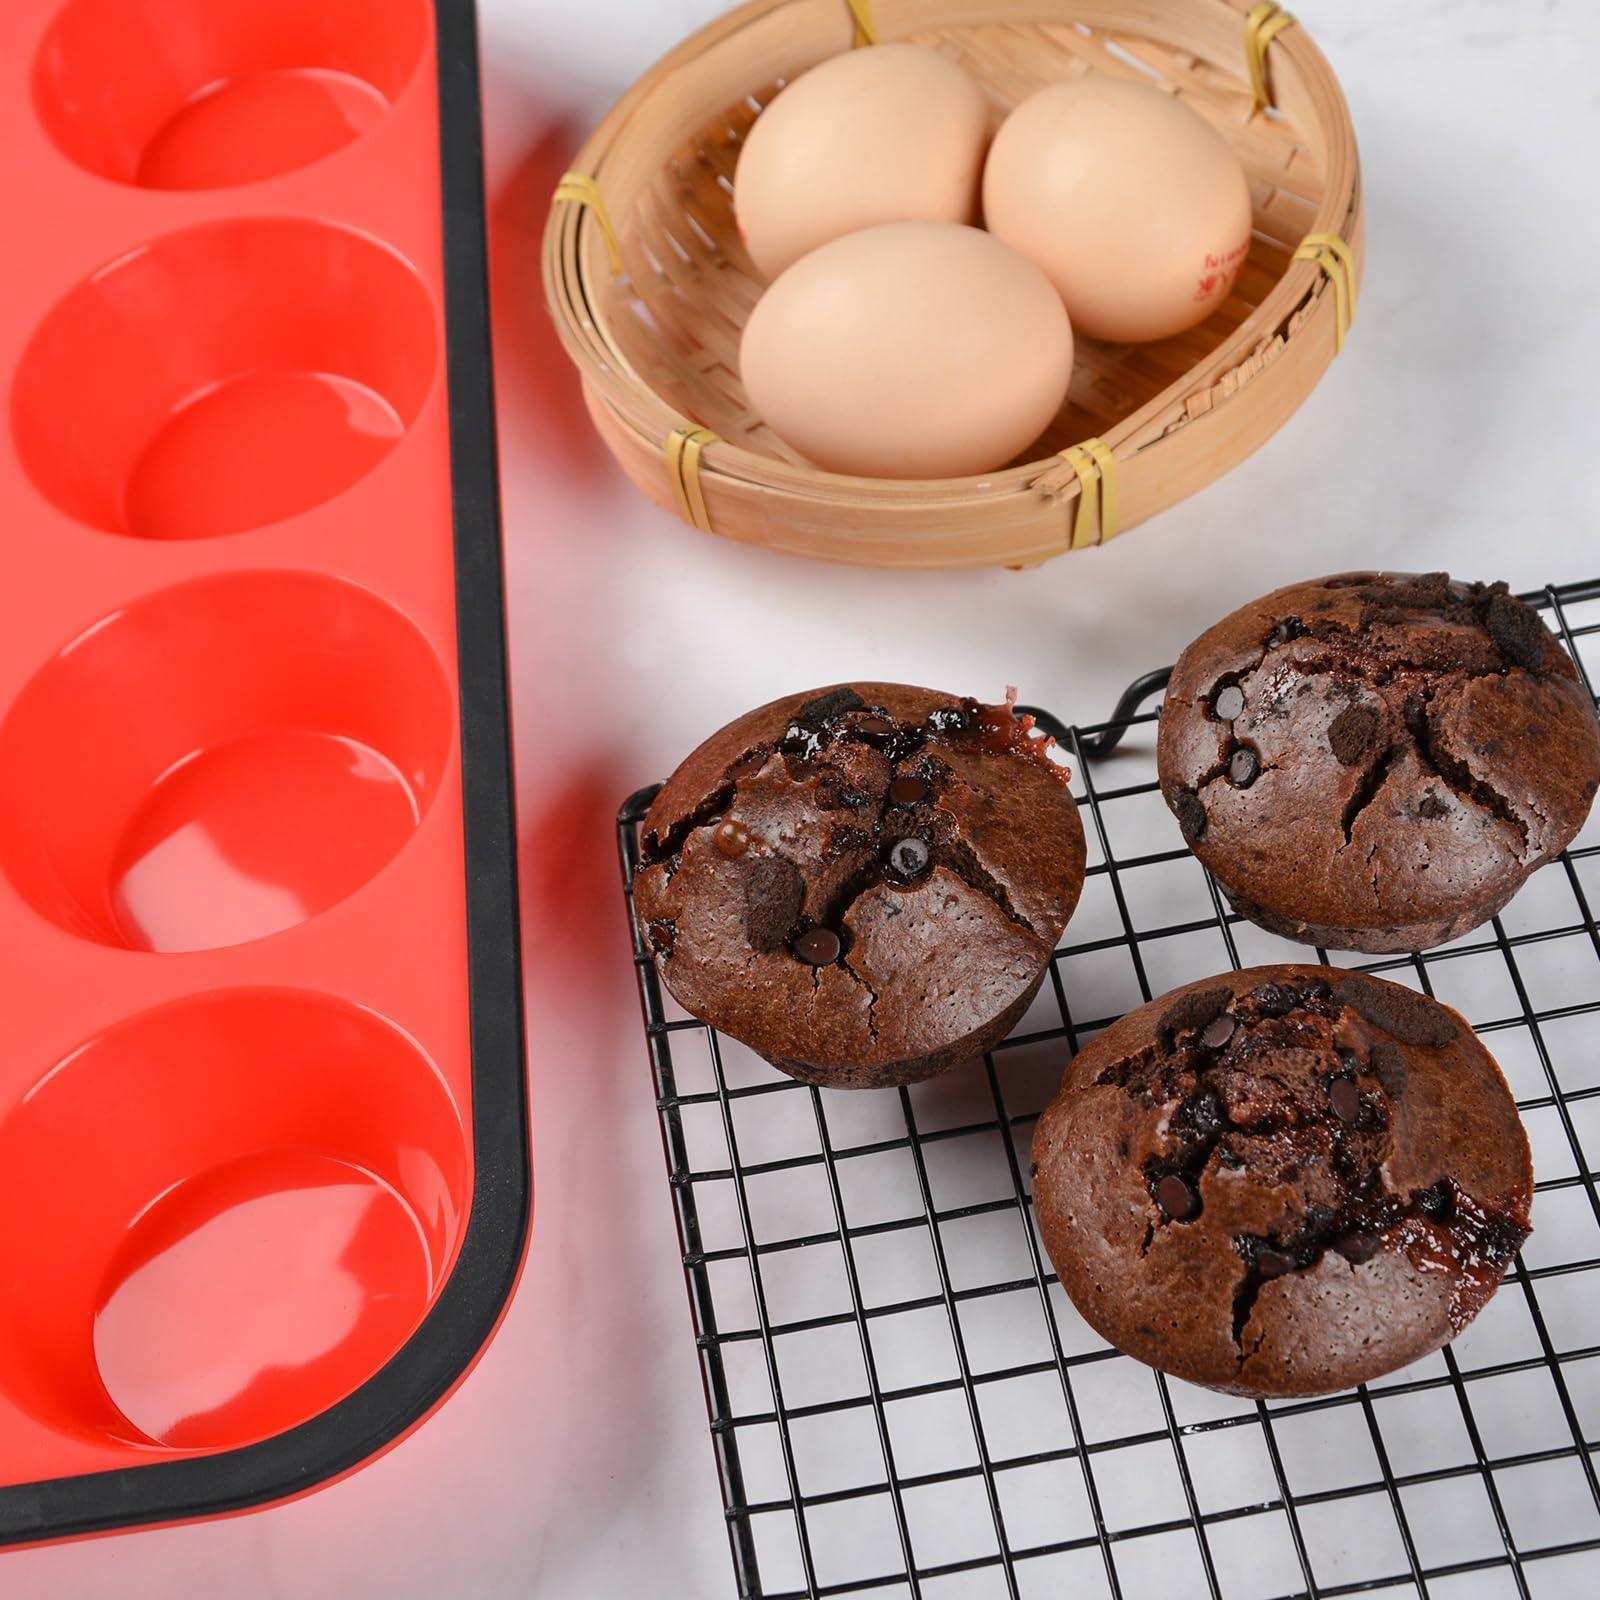 CAKETIME Muffin Pan, Silicone Cupcake Pan Metal Reinforced Frame 12 Cups Regular Silicone Muffin Tray Nonstick BPA Free 2 Pack - CookCave